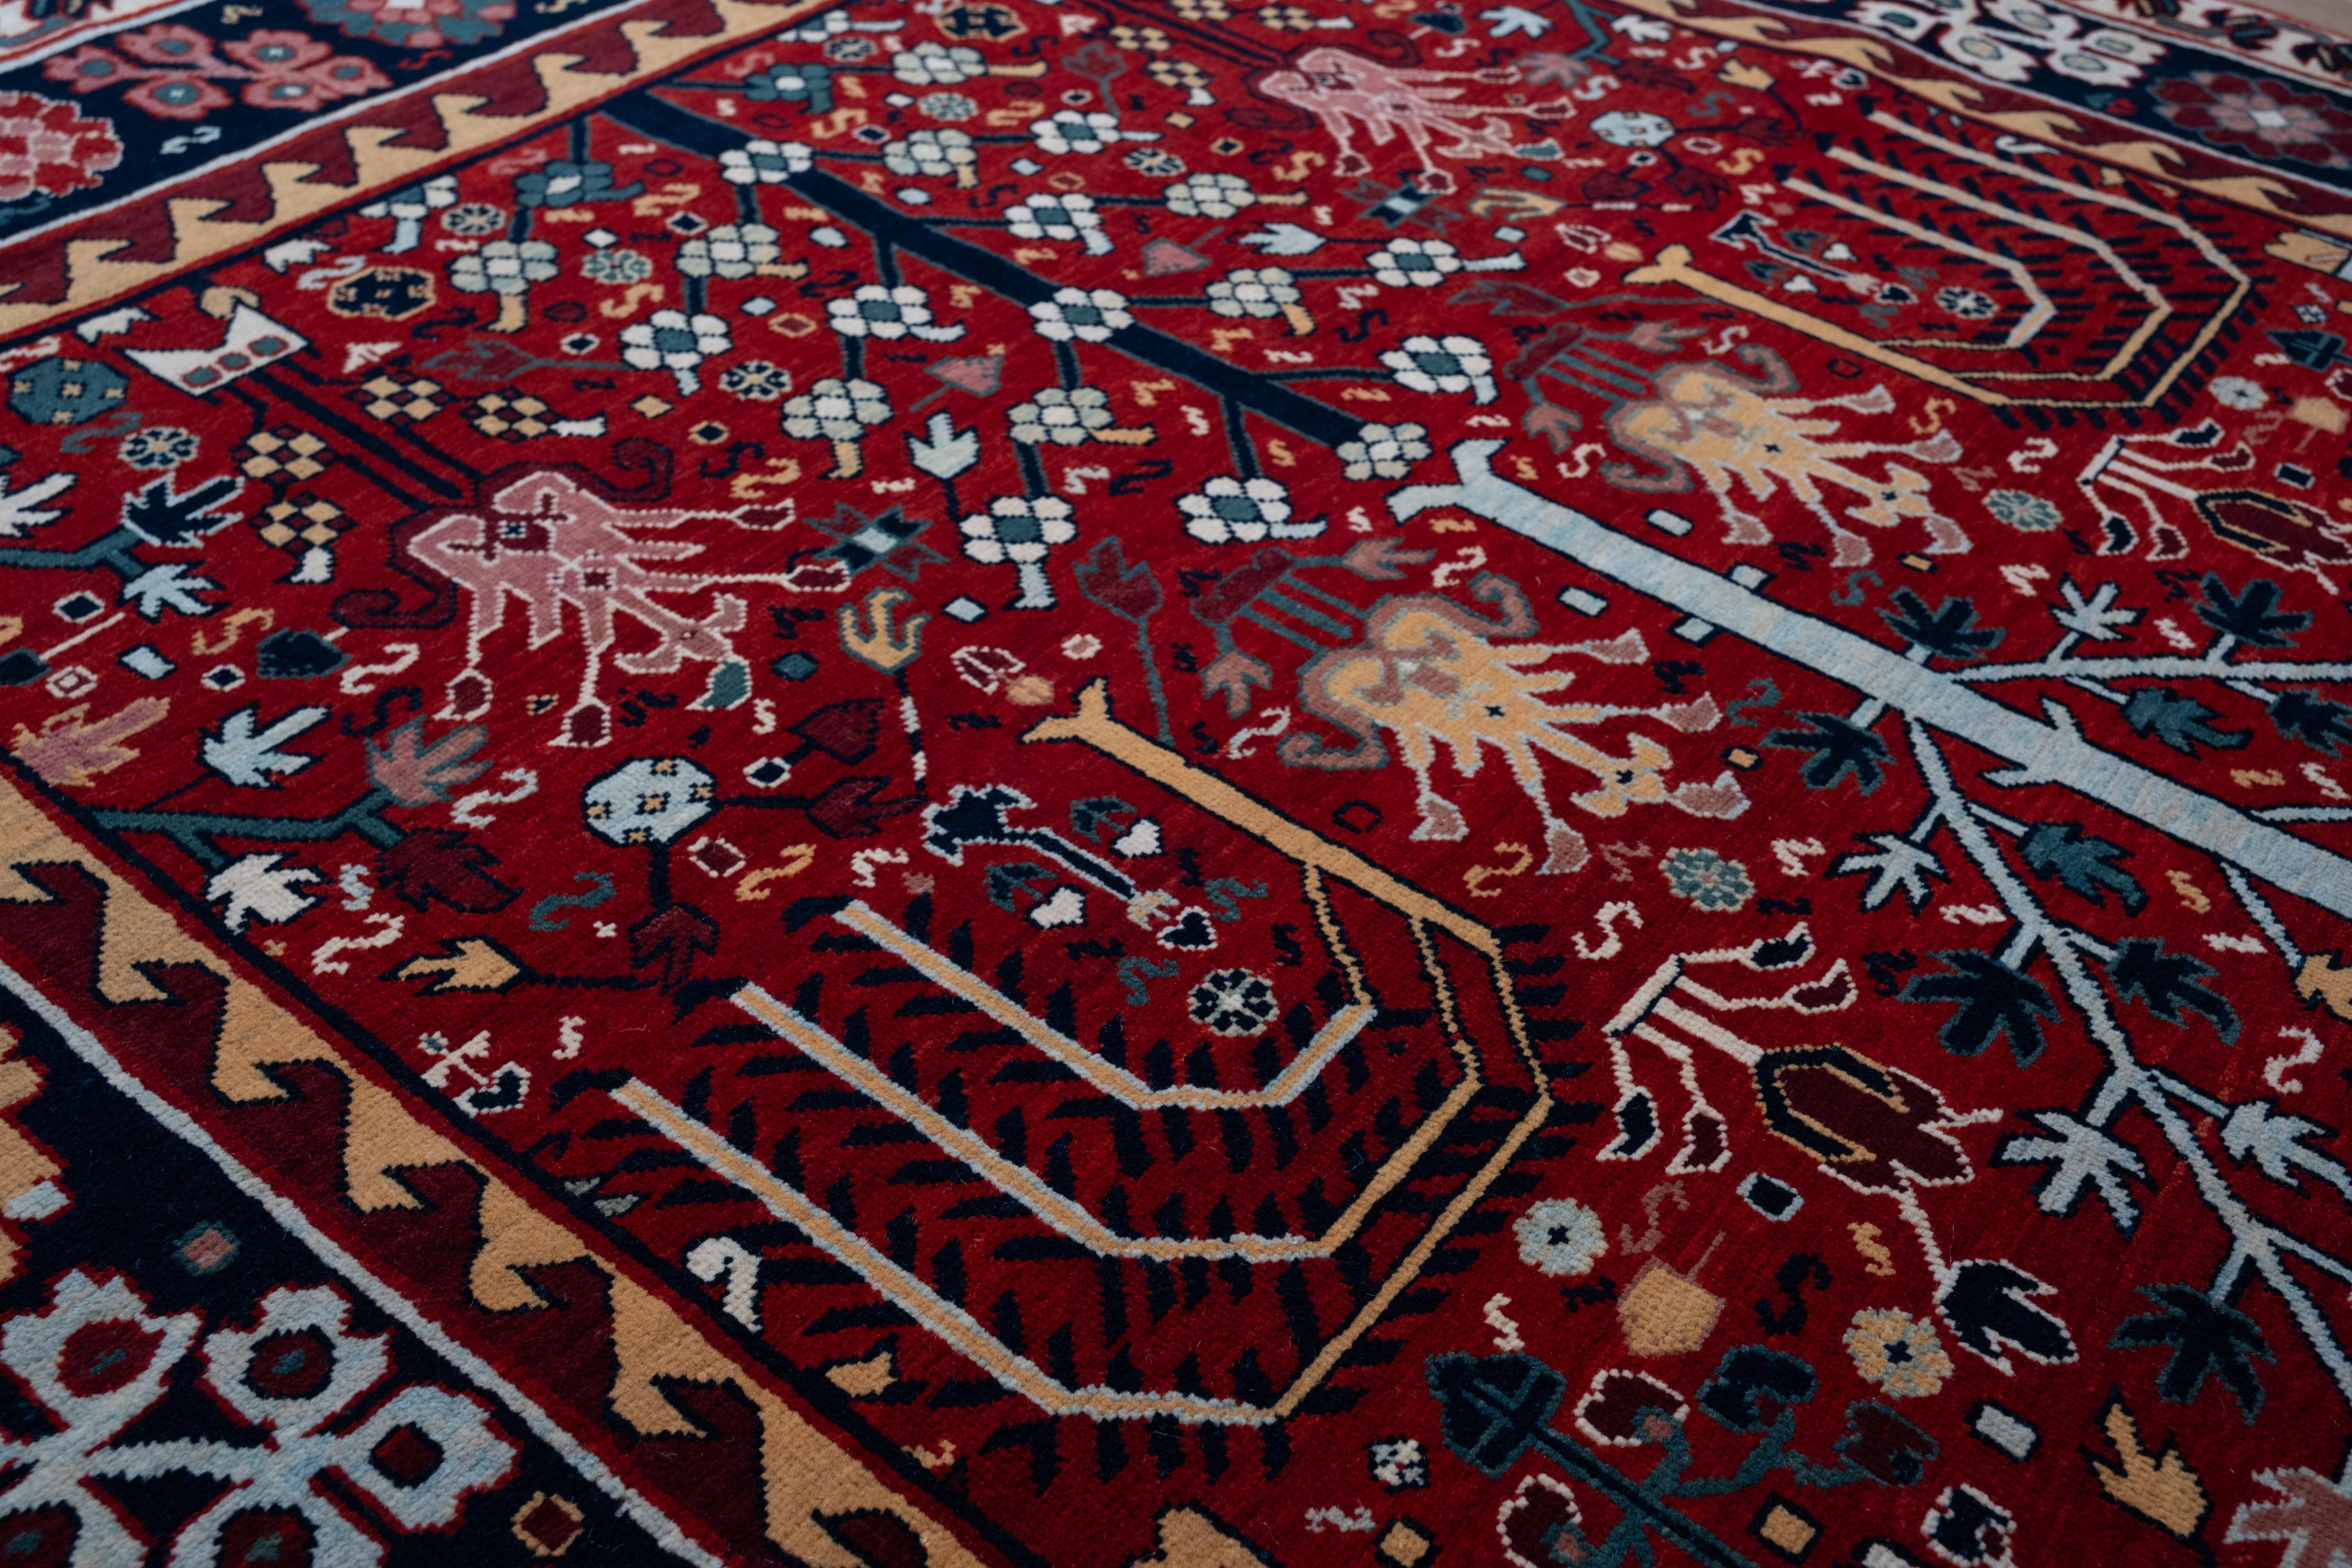 The source of the rug comes from the book Antique Rugs of Kurdistan A Historical Legacy of Woven Art, James D. Burns, 2002 nr.45. This is a popular design employed by the Kurds, called bid majnum (or Bid Majnun, weeping willow) 17th-century rug from